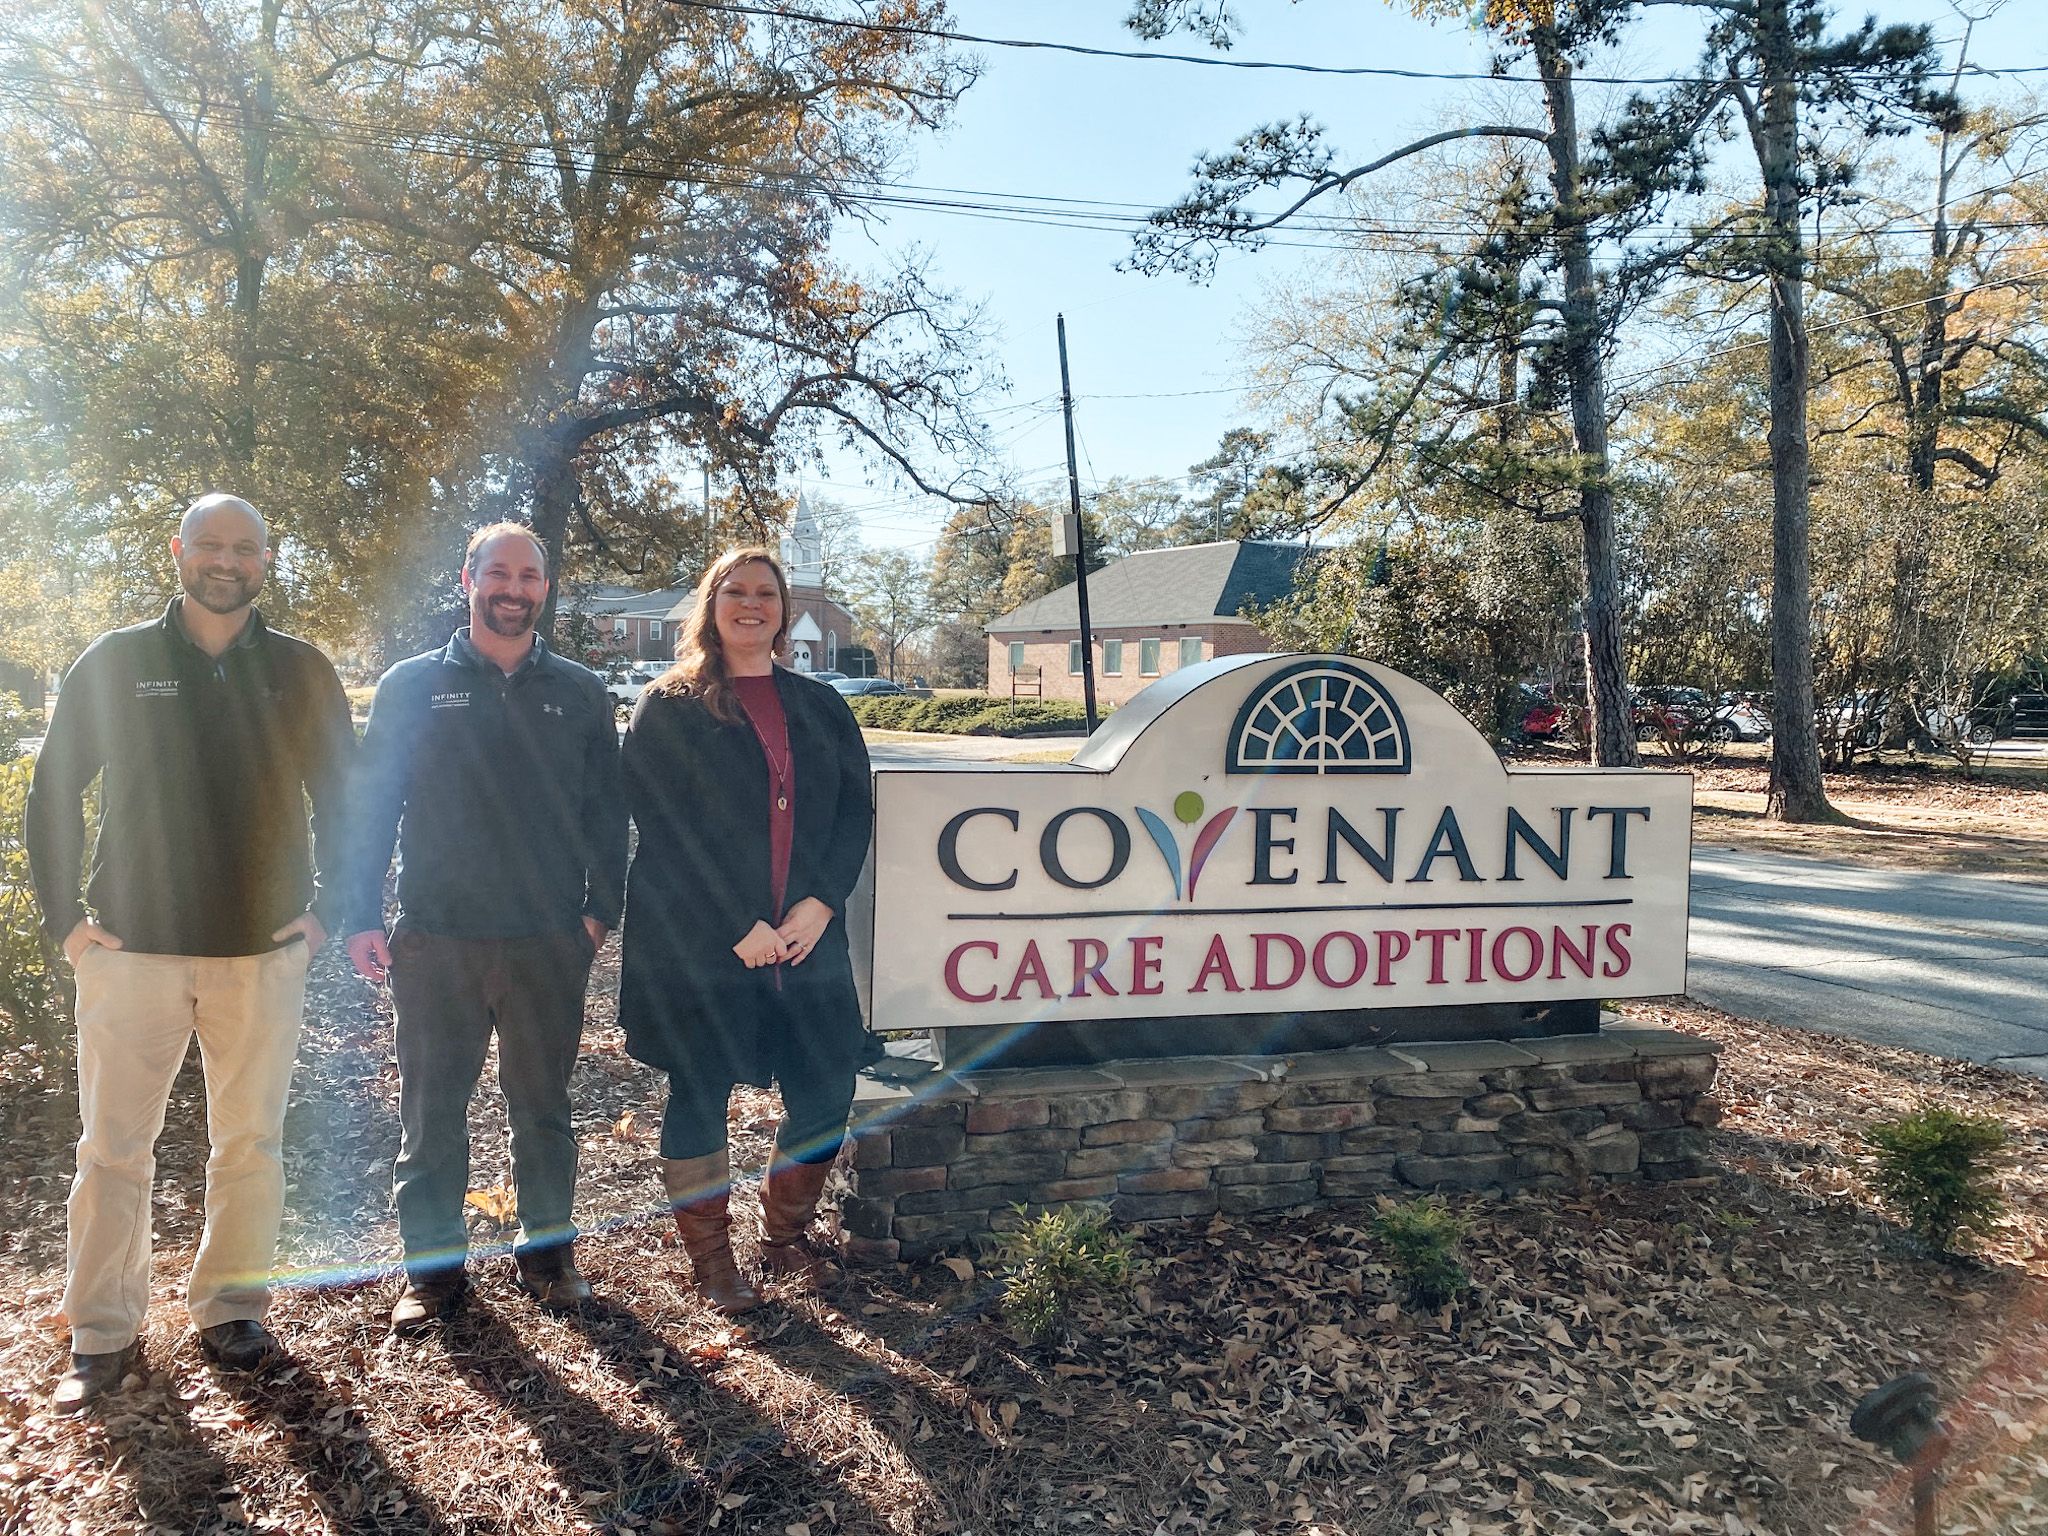 Visiting with Carol Gledhill, the Executive Director of Covenant Care